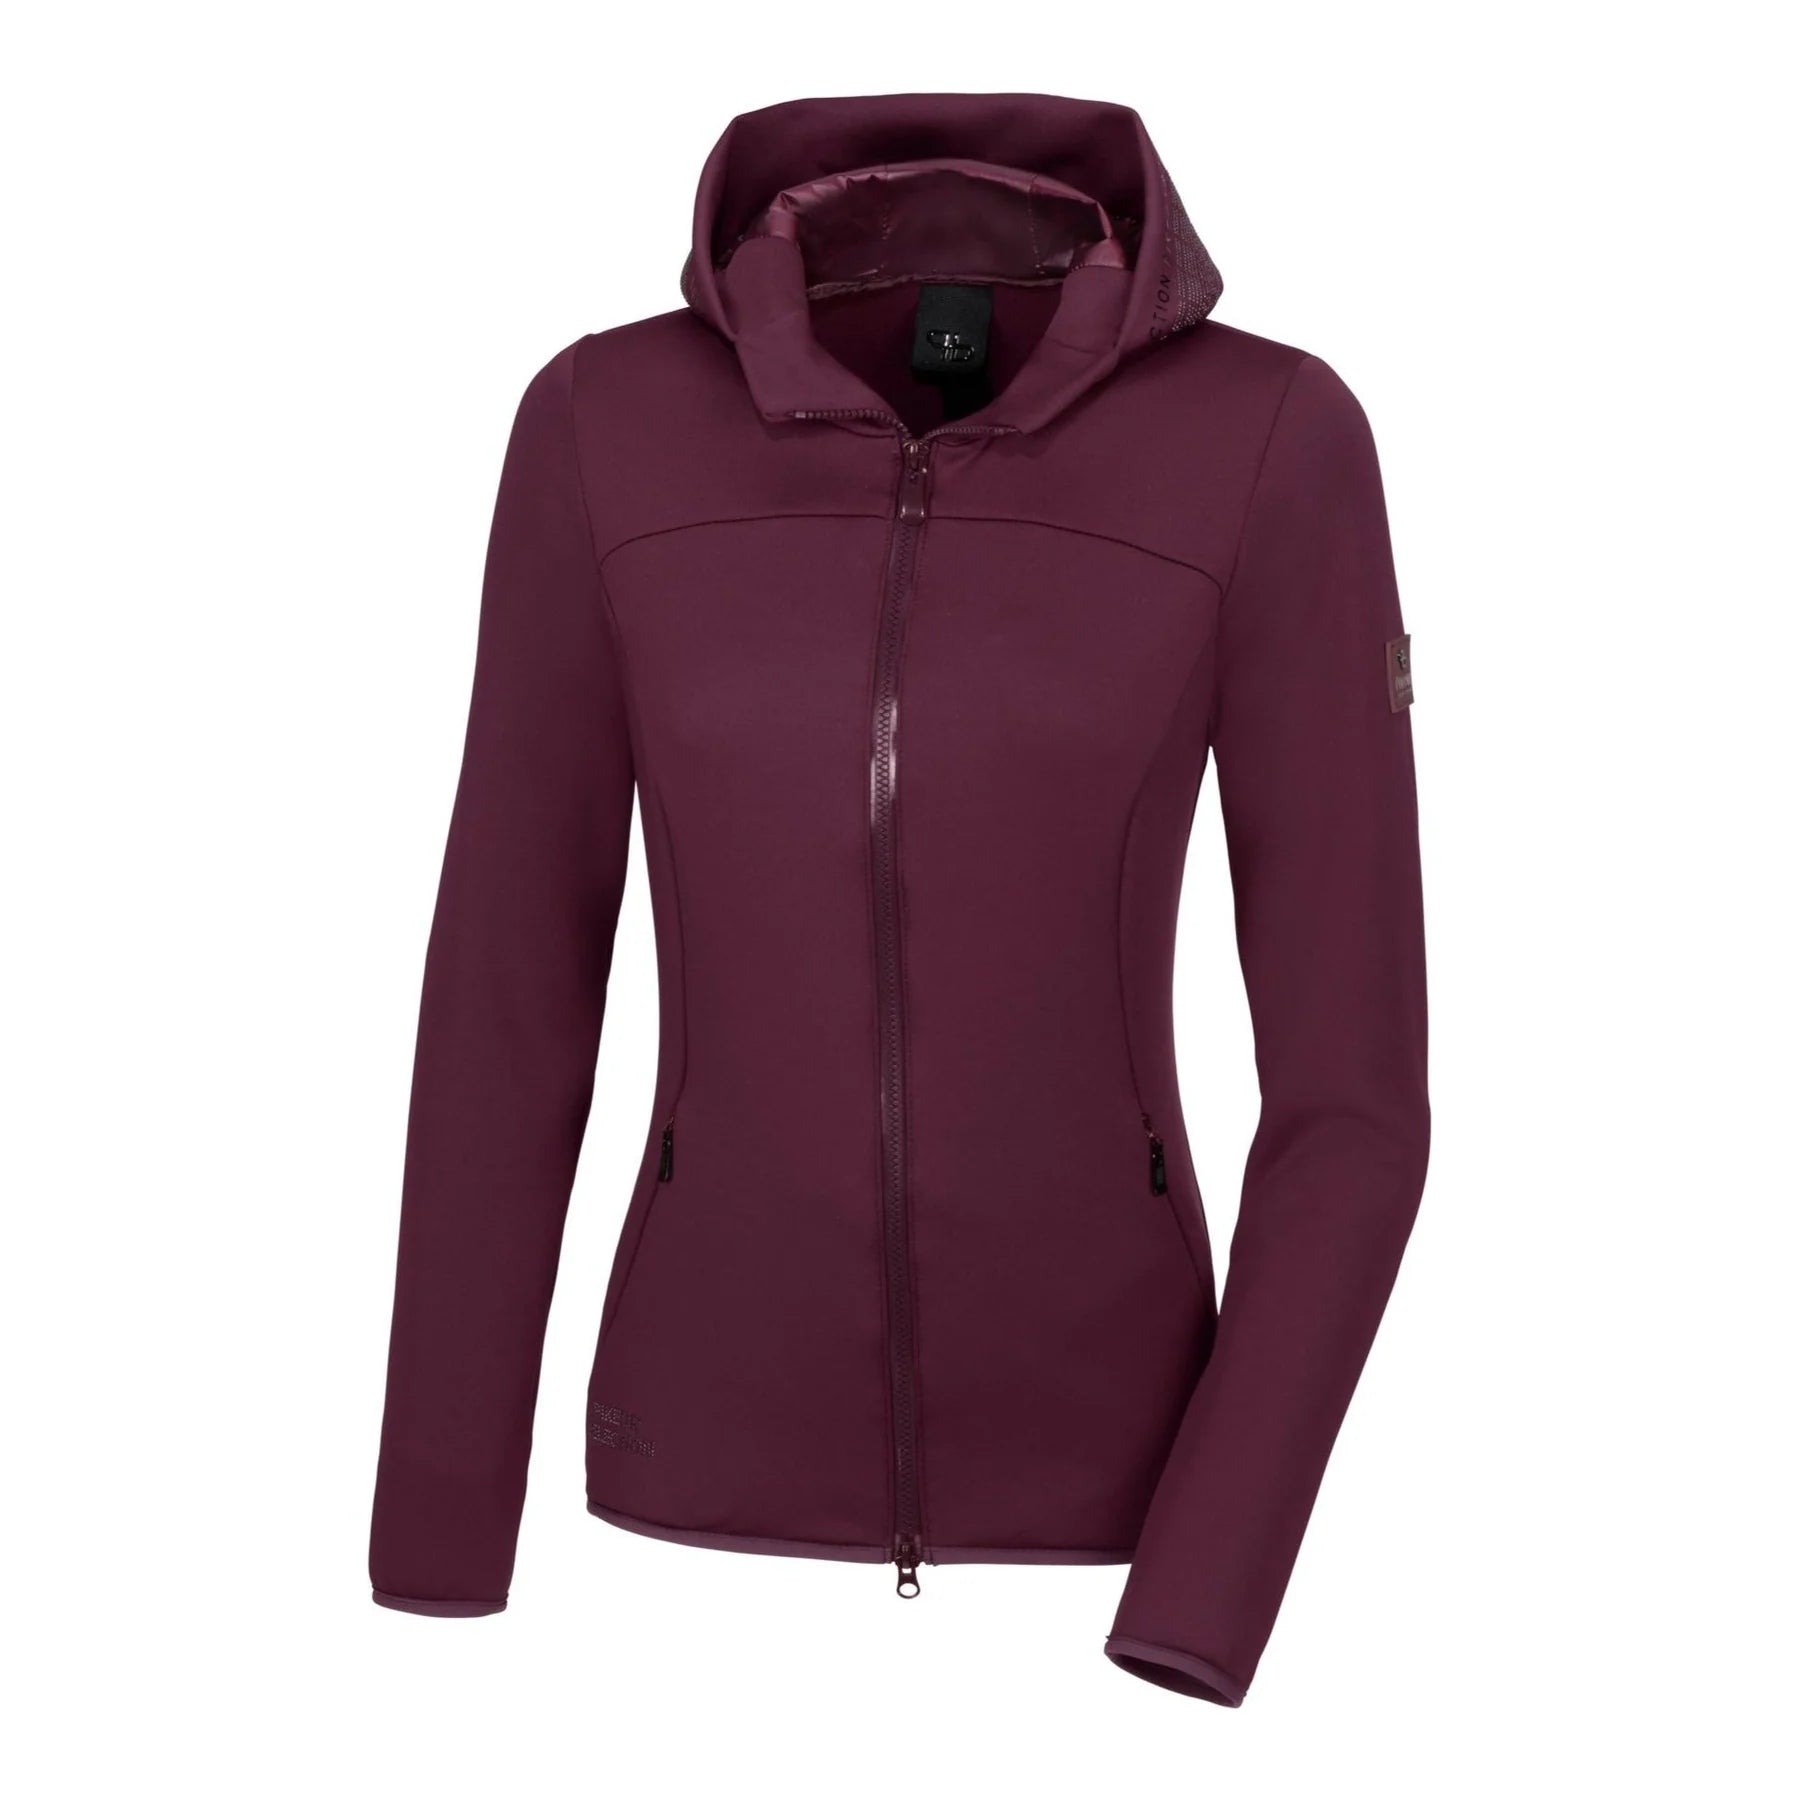 Pikeur selection fleece jacket in Mulberry